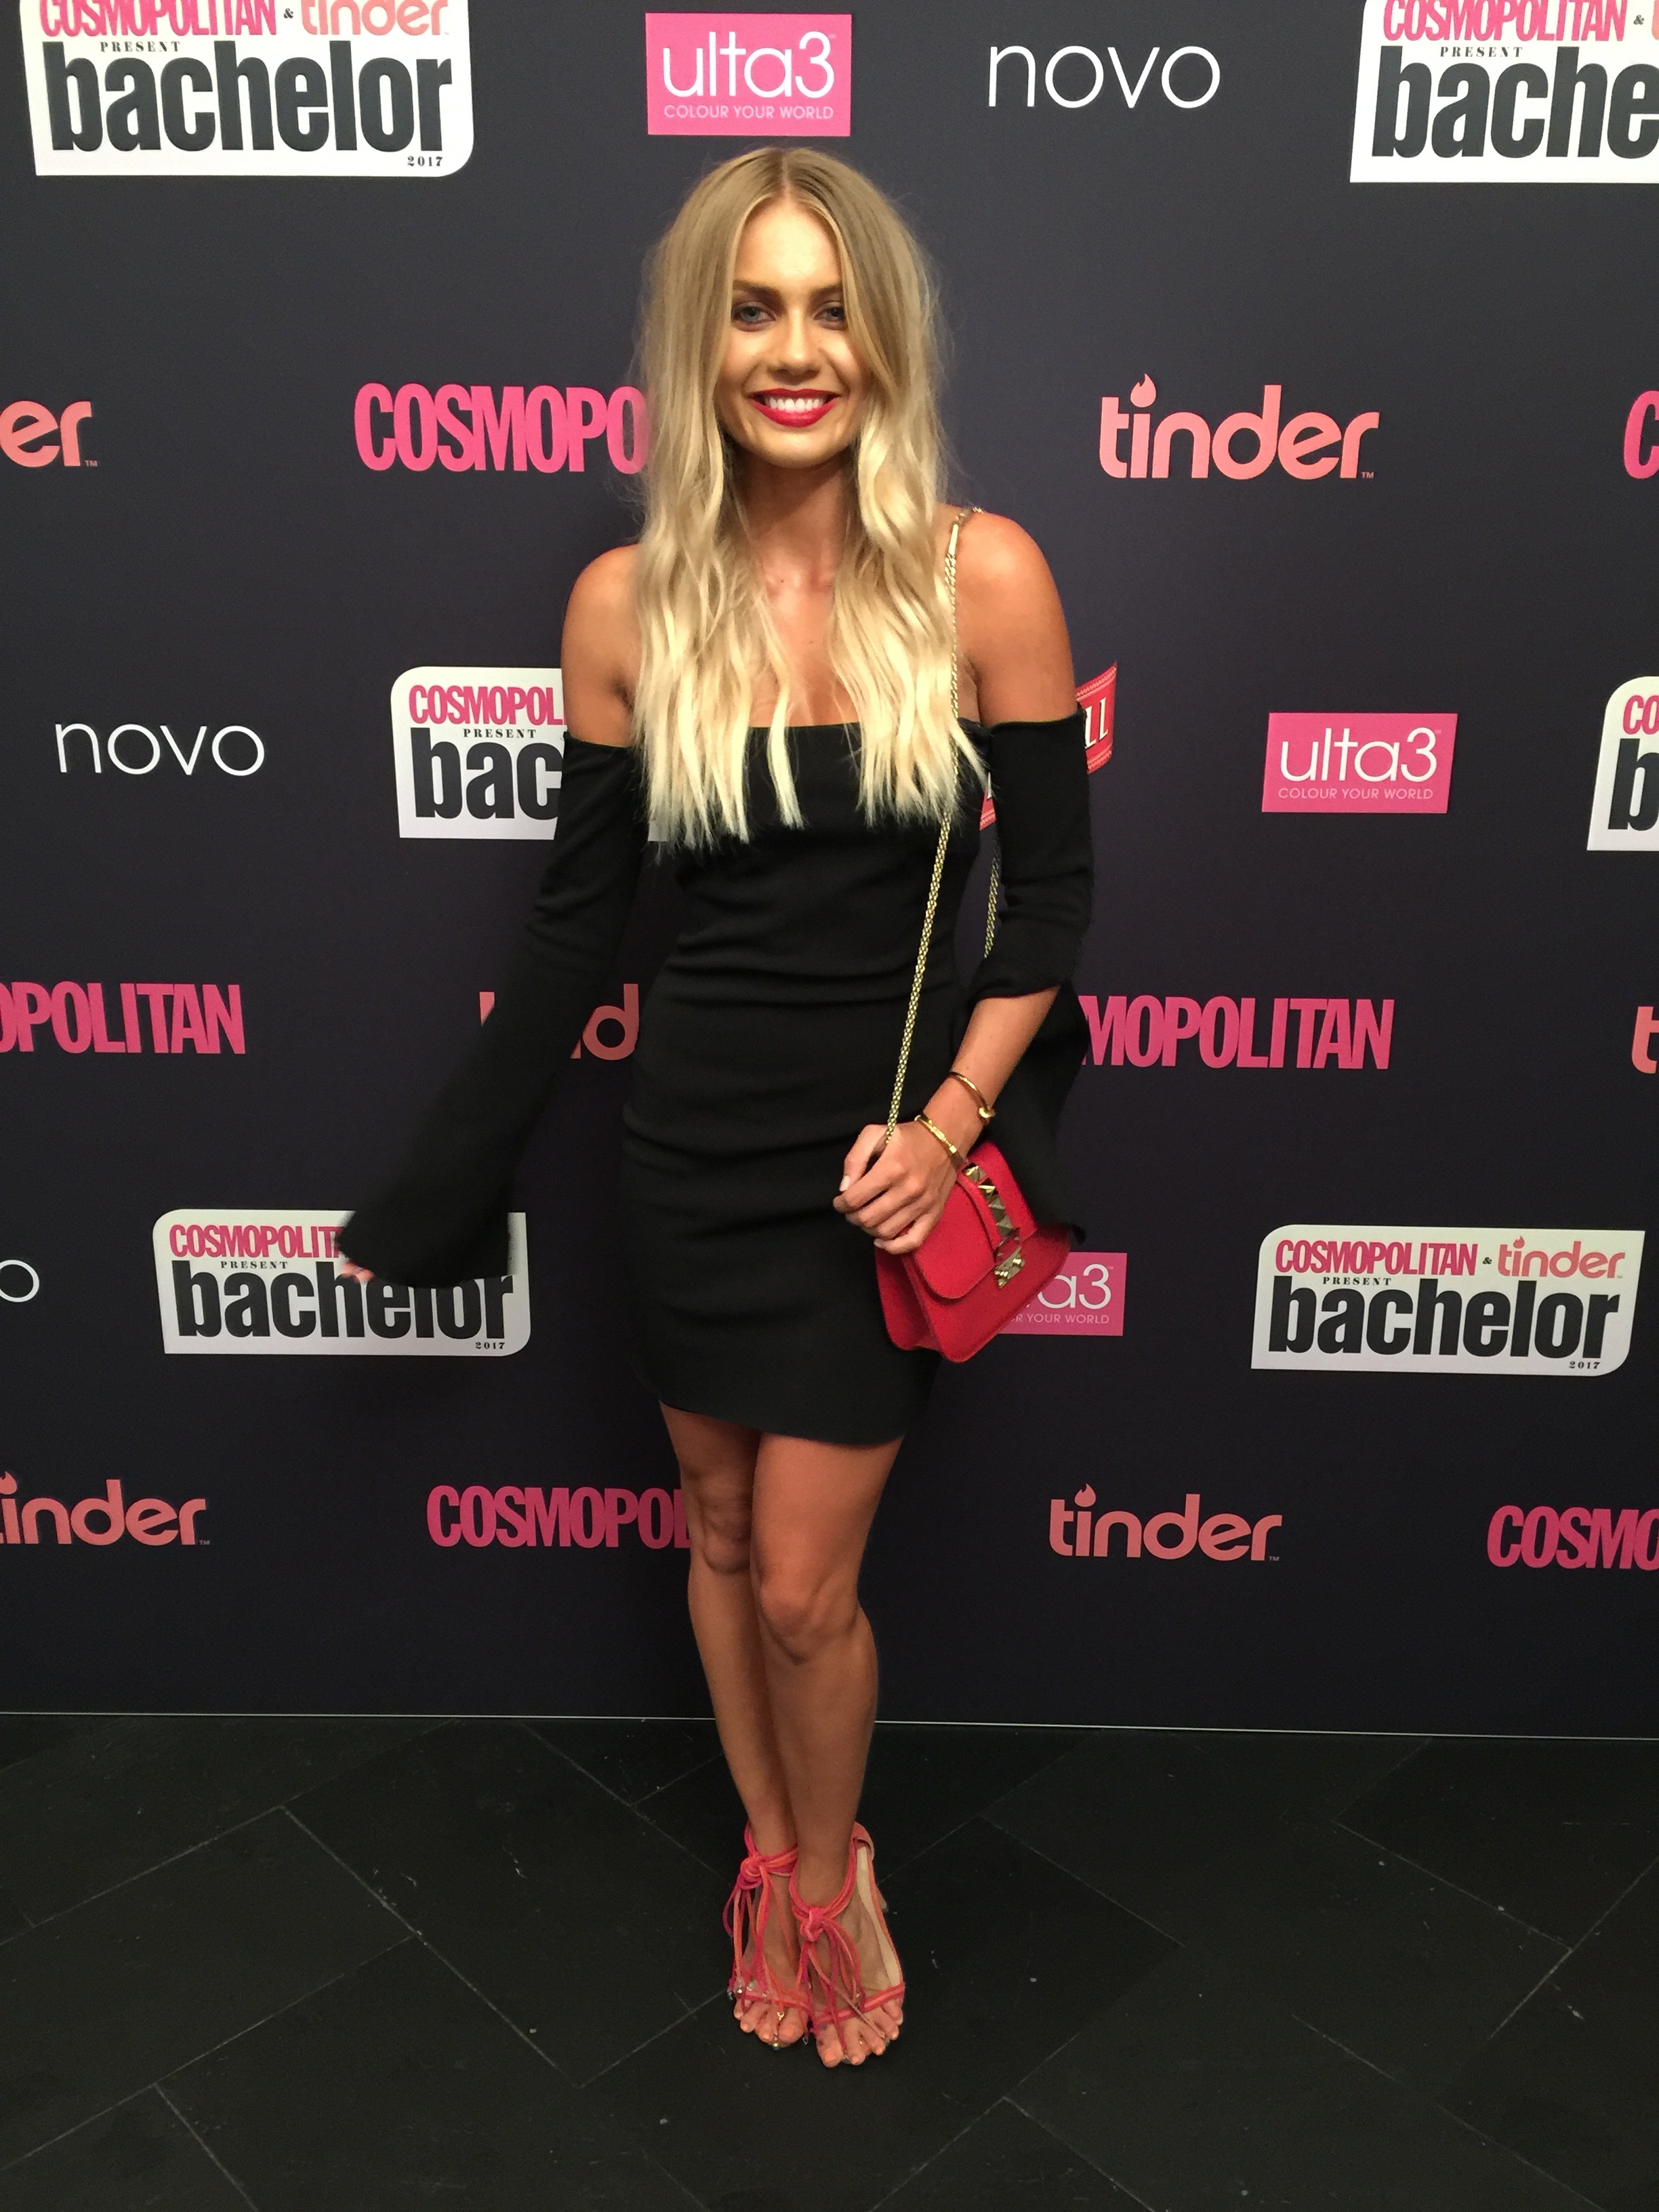 Elyse Knowles Cosmo Bachelor Of the Year Awards 17_5610.JPG